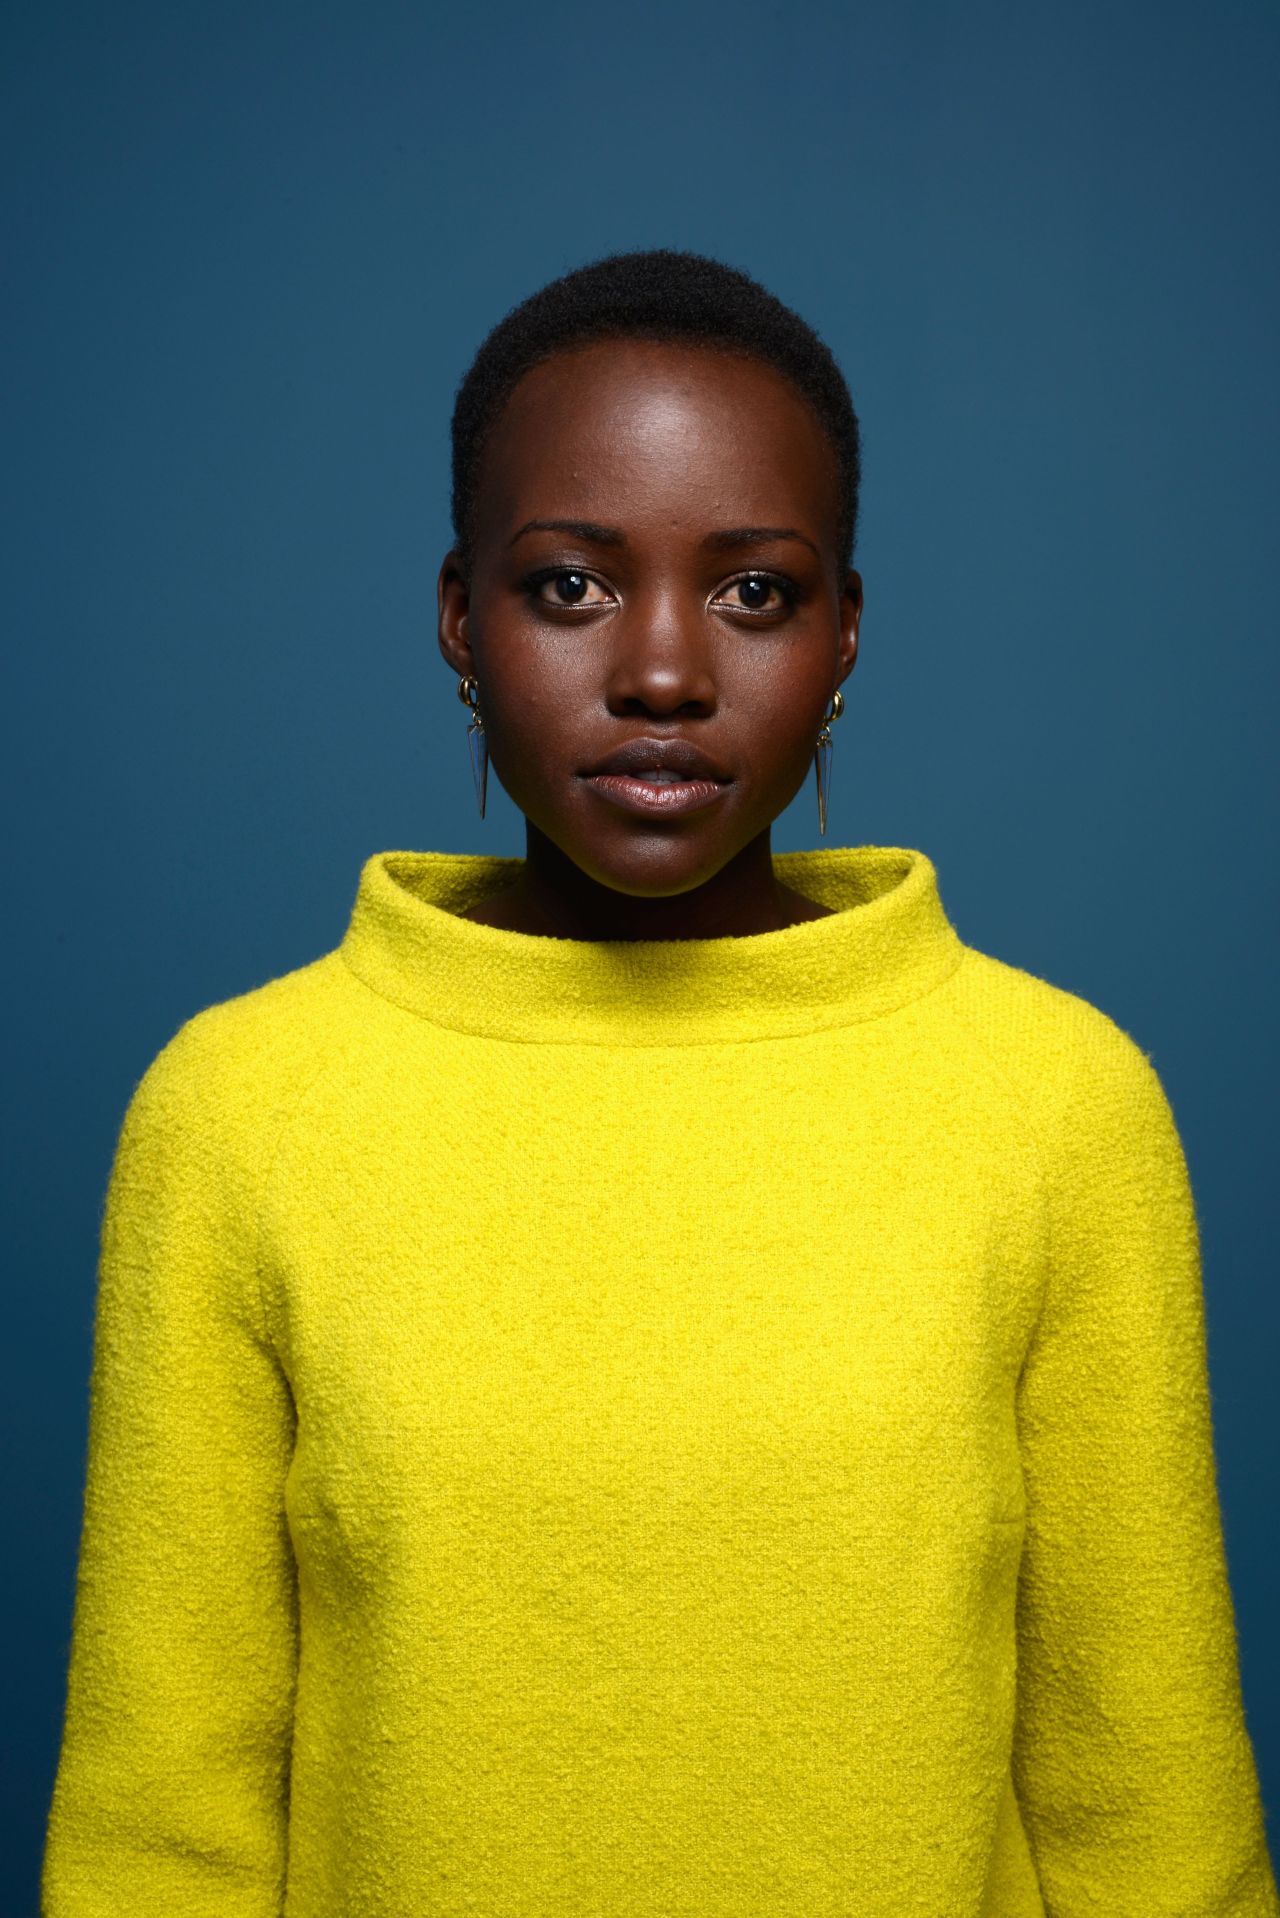 Kenyan actress Lupita Nyong'o has become one of Hollywood's hottest "It" girls. 